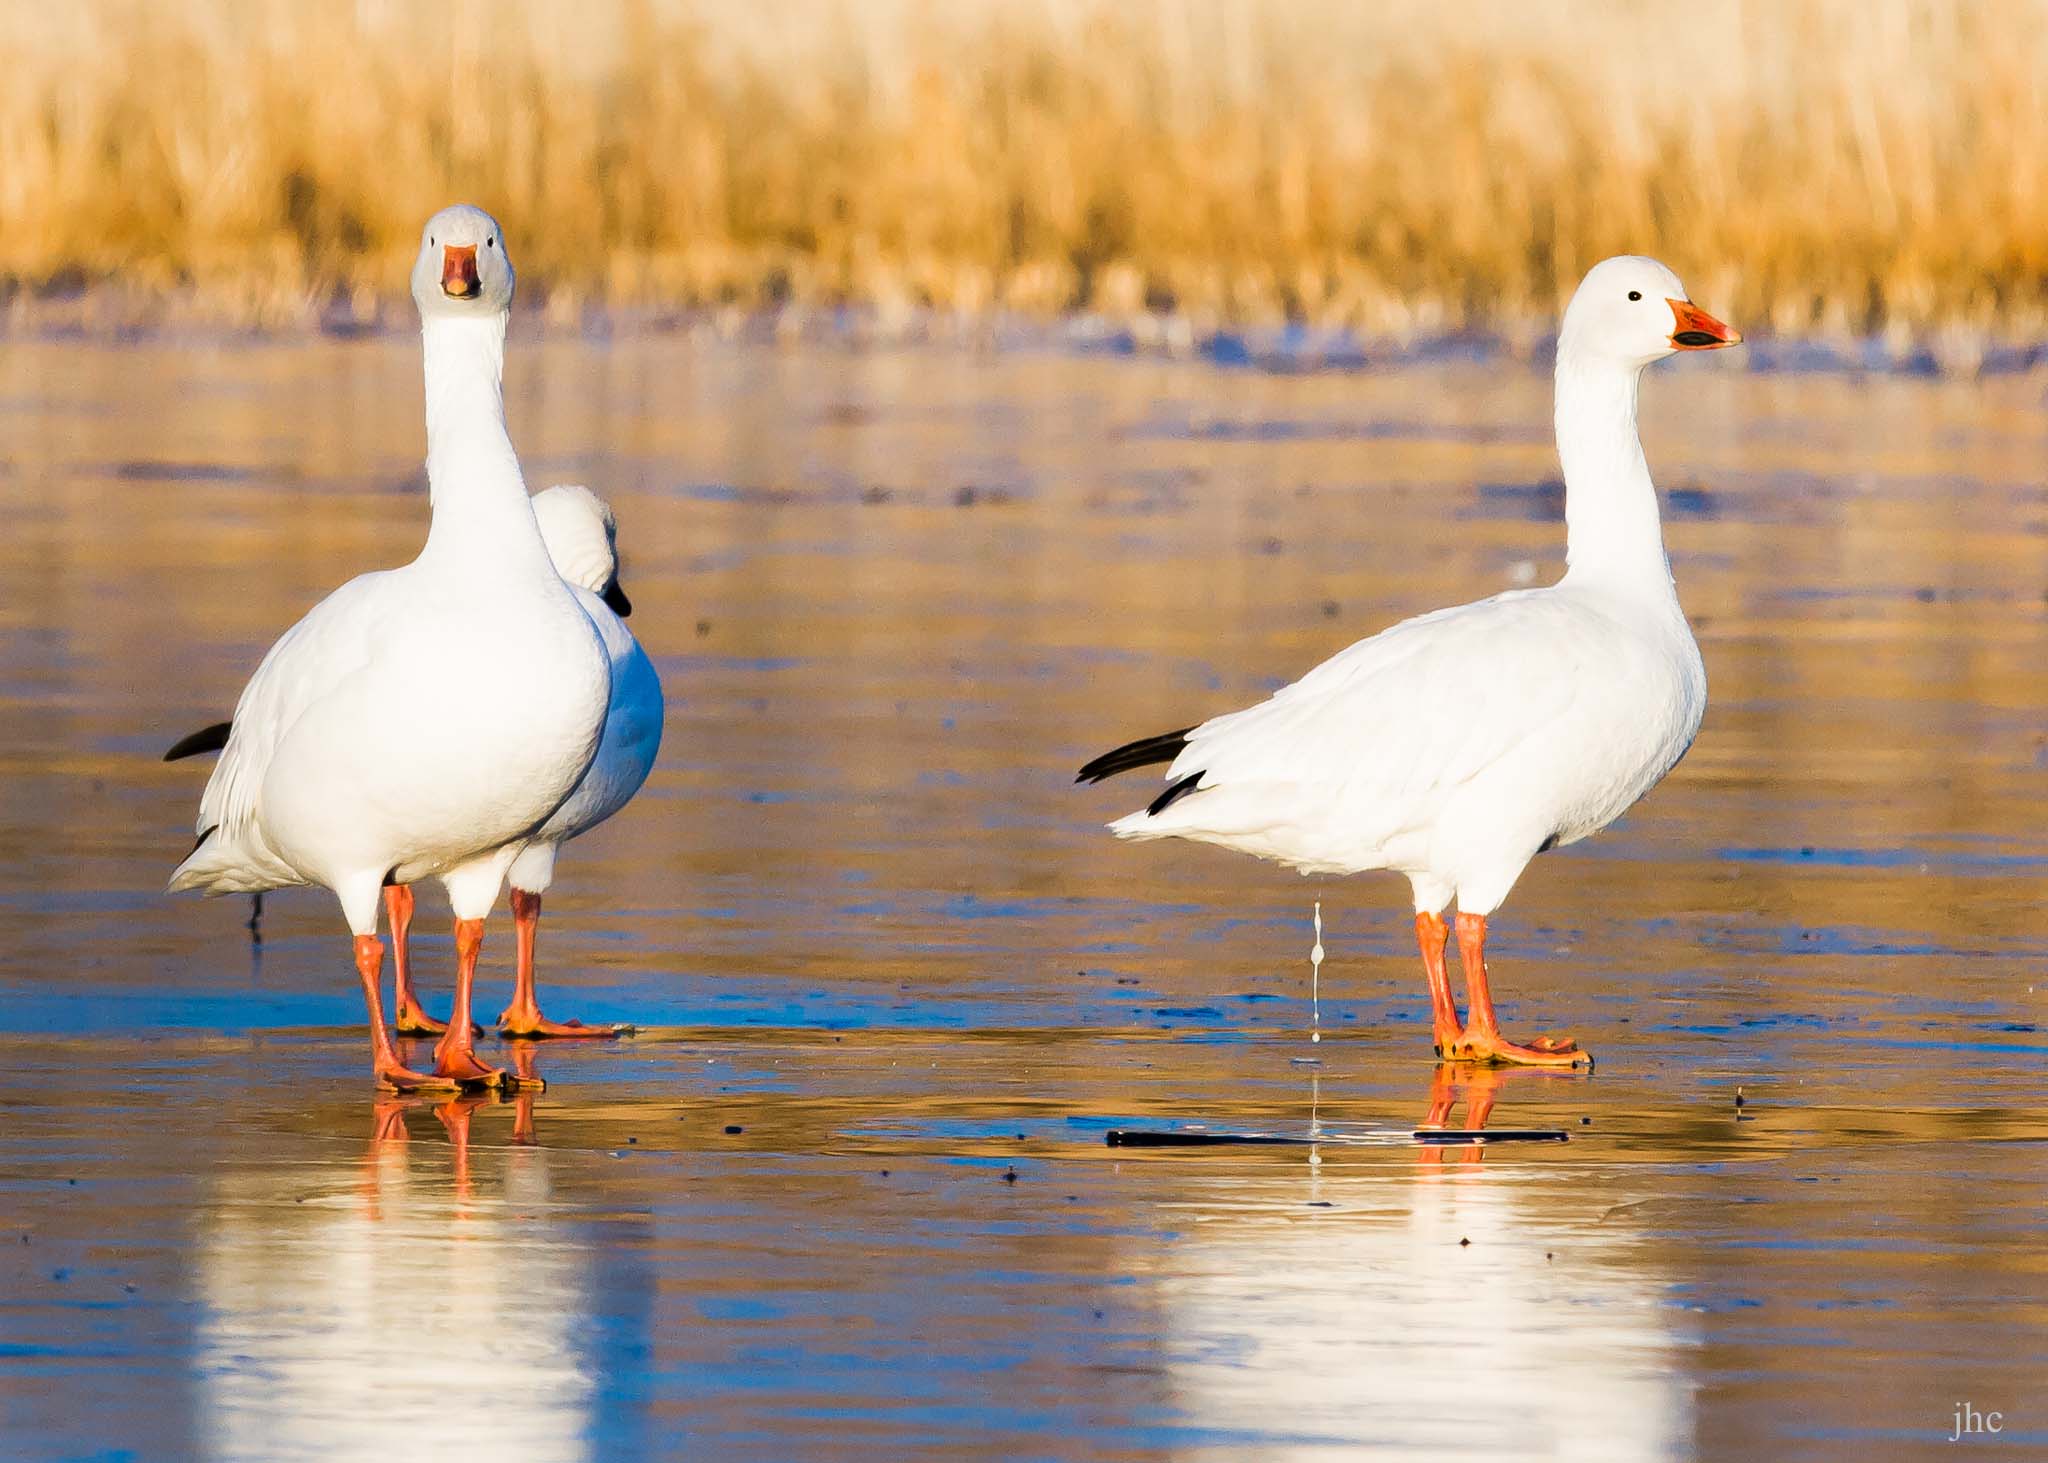 Snow Geese on an icy morning, Bosque del Apache National Wildlife Refuge, San Antonio NM, January 10, 2013